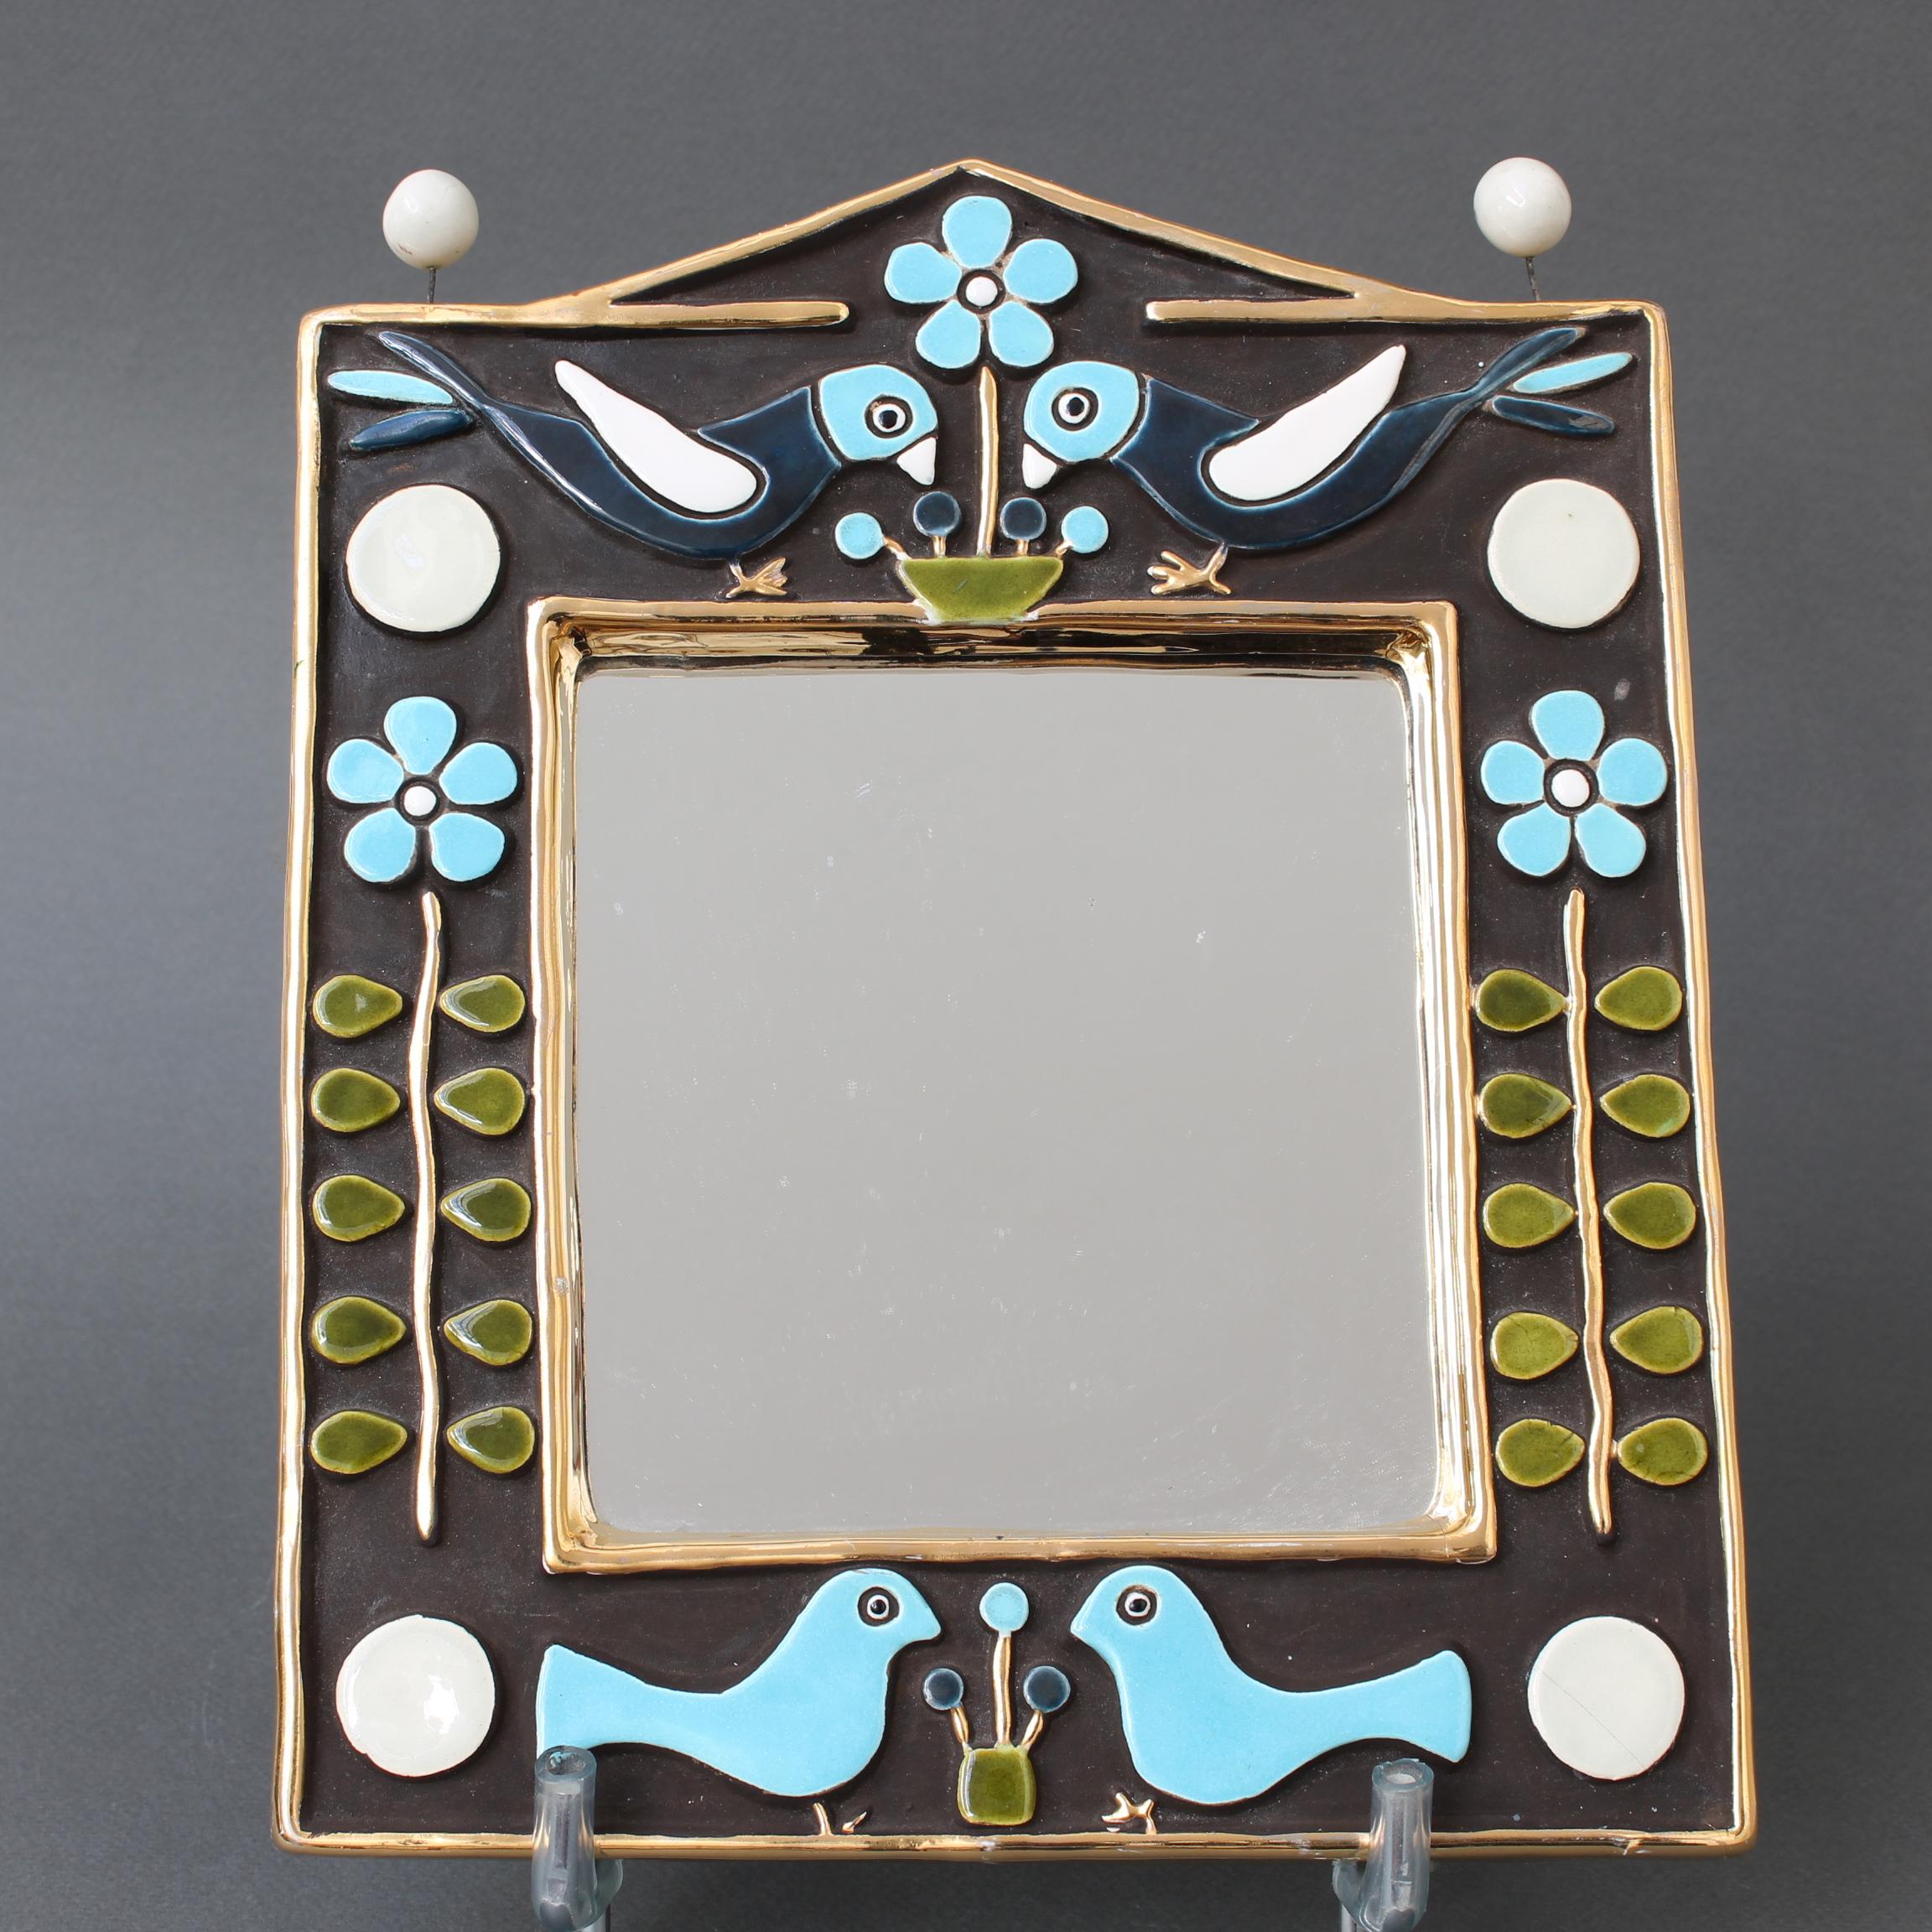 Ceramic wall mirror with birds and flowers (circa 1970s) by Mithé Espelt. A delightful decorative piece topped with two pairs of whimsical enamel birds above and below the square mirror. The mirror is framed with a gold crackle glaze which also